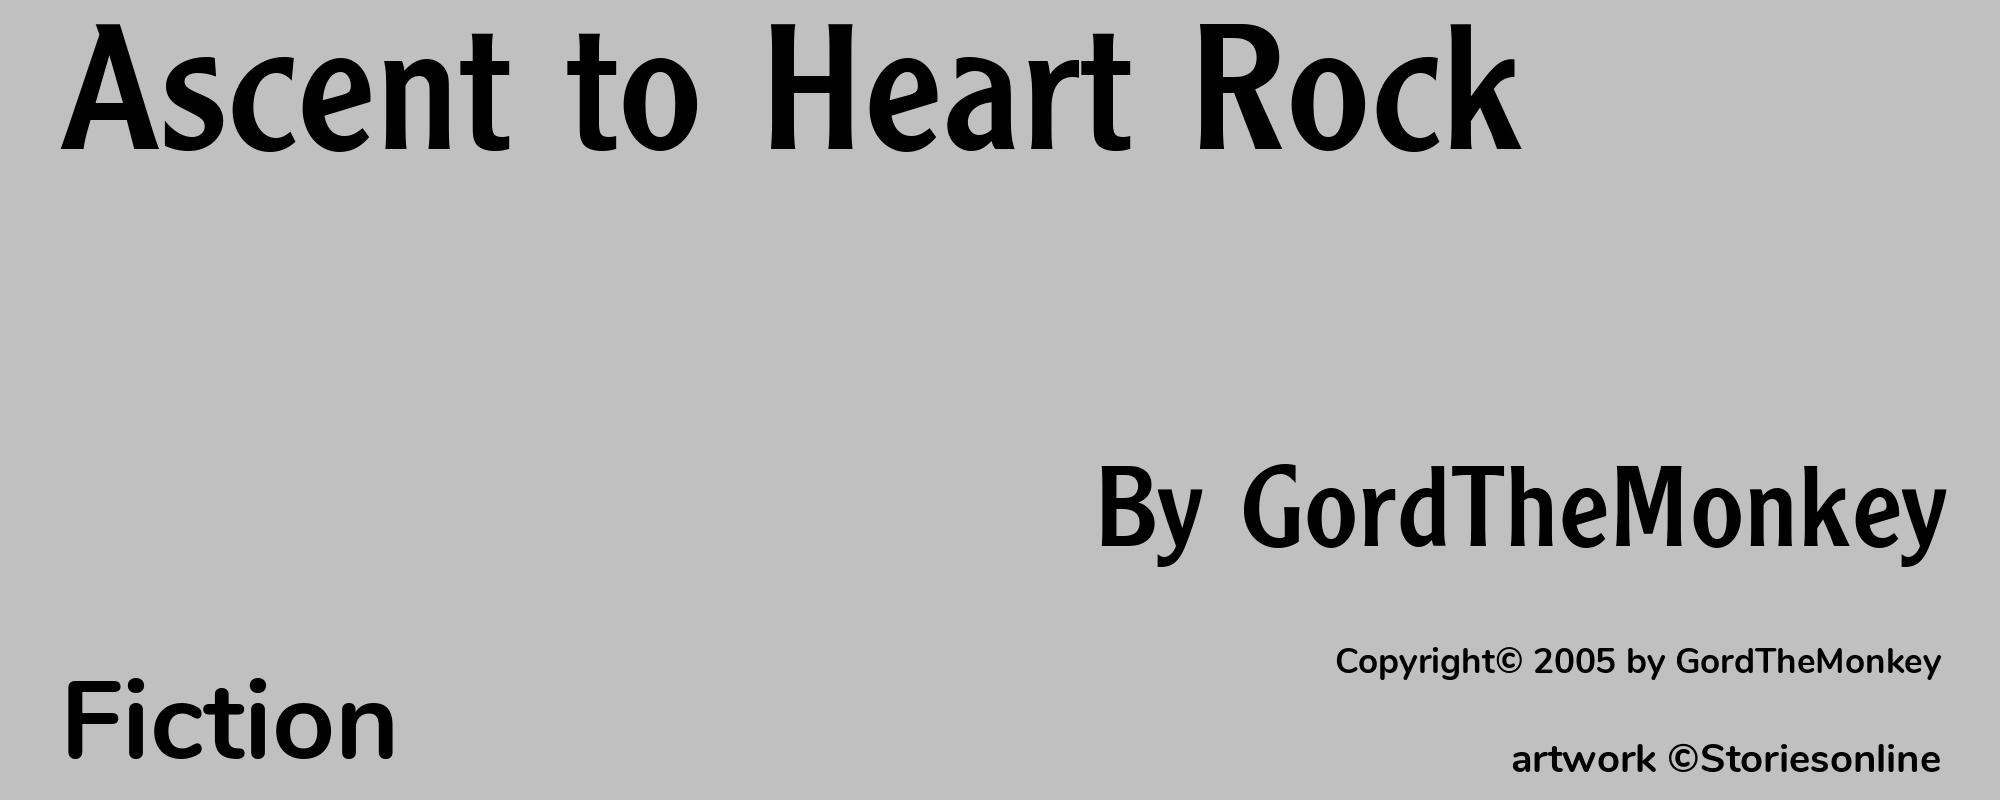 Ascent to Heart Rock - Cover